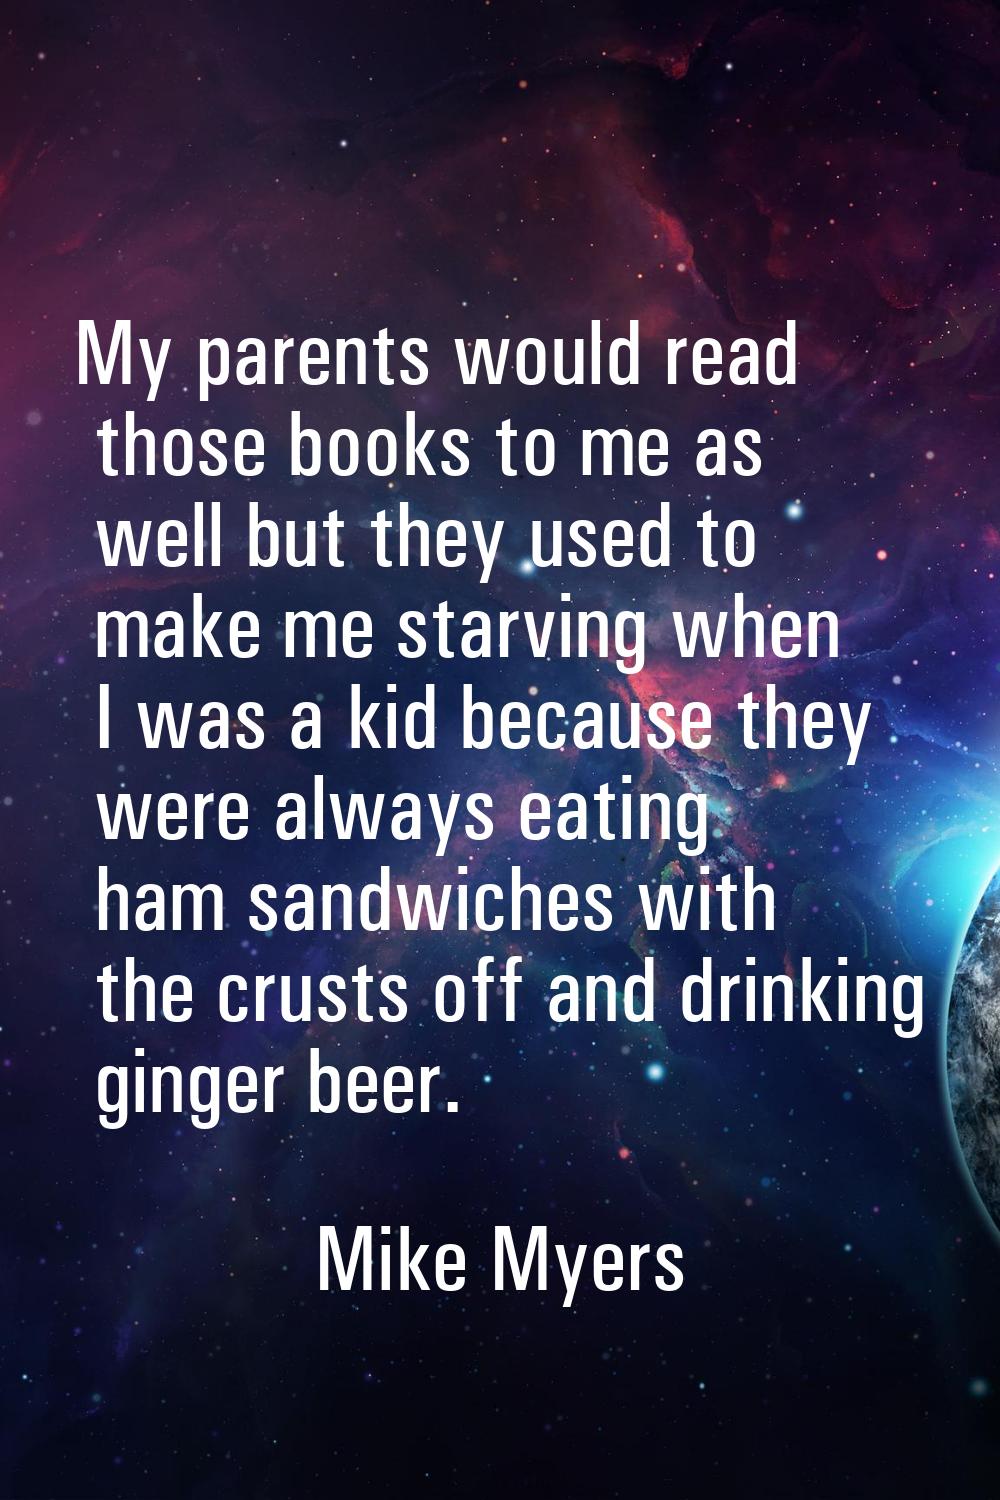 My parents would read those books to me as well but they used to make me starving when I was a kid 